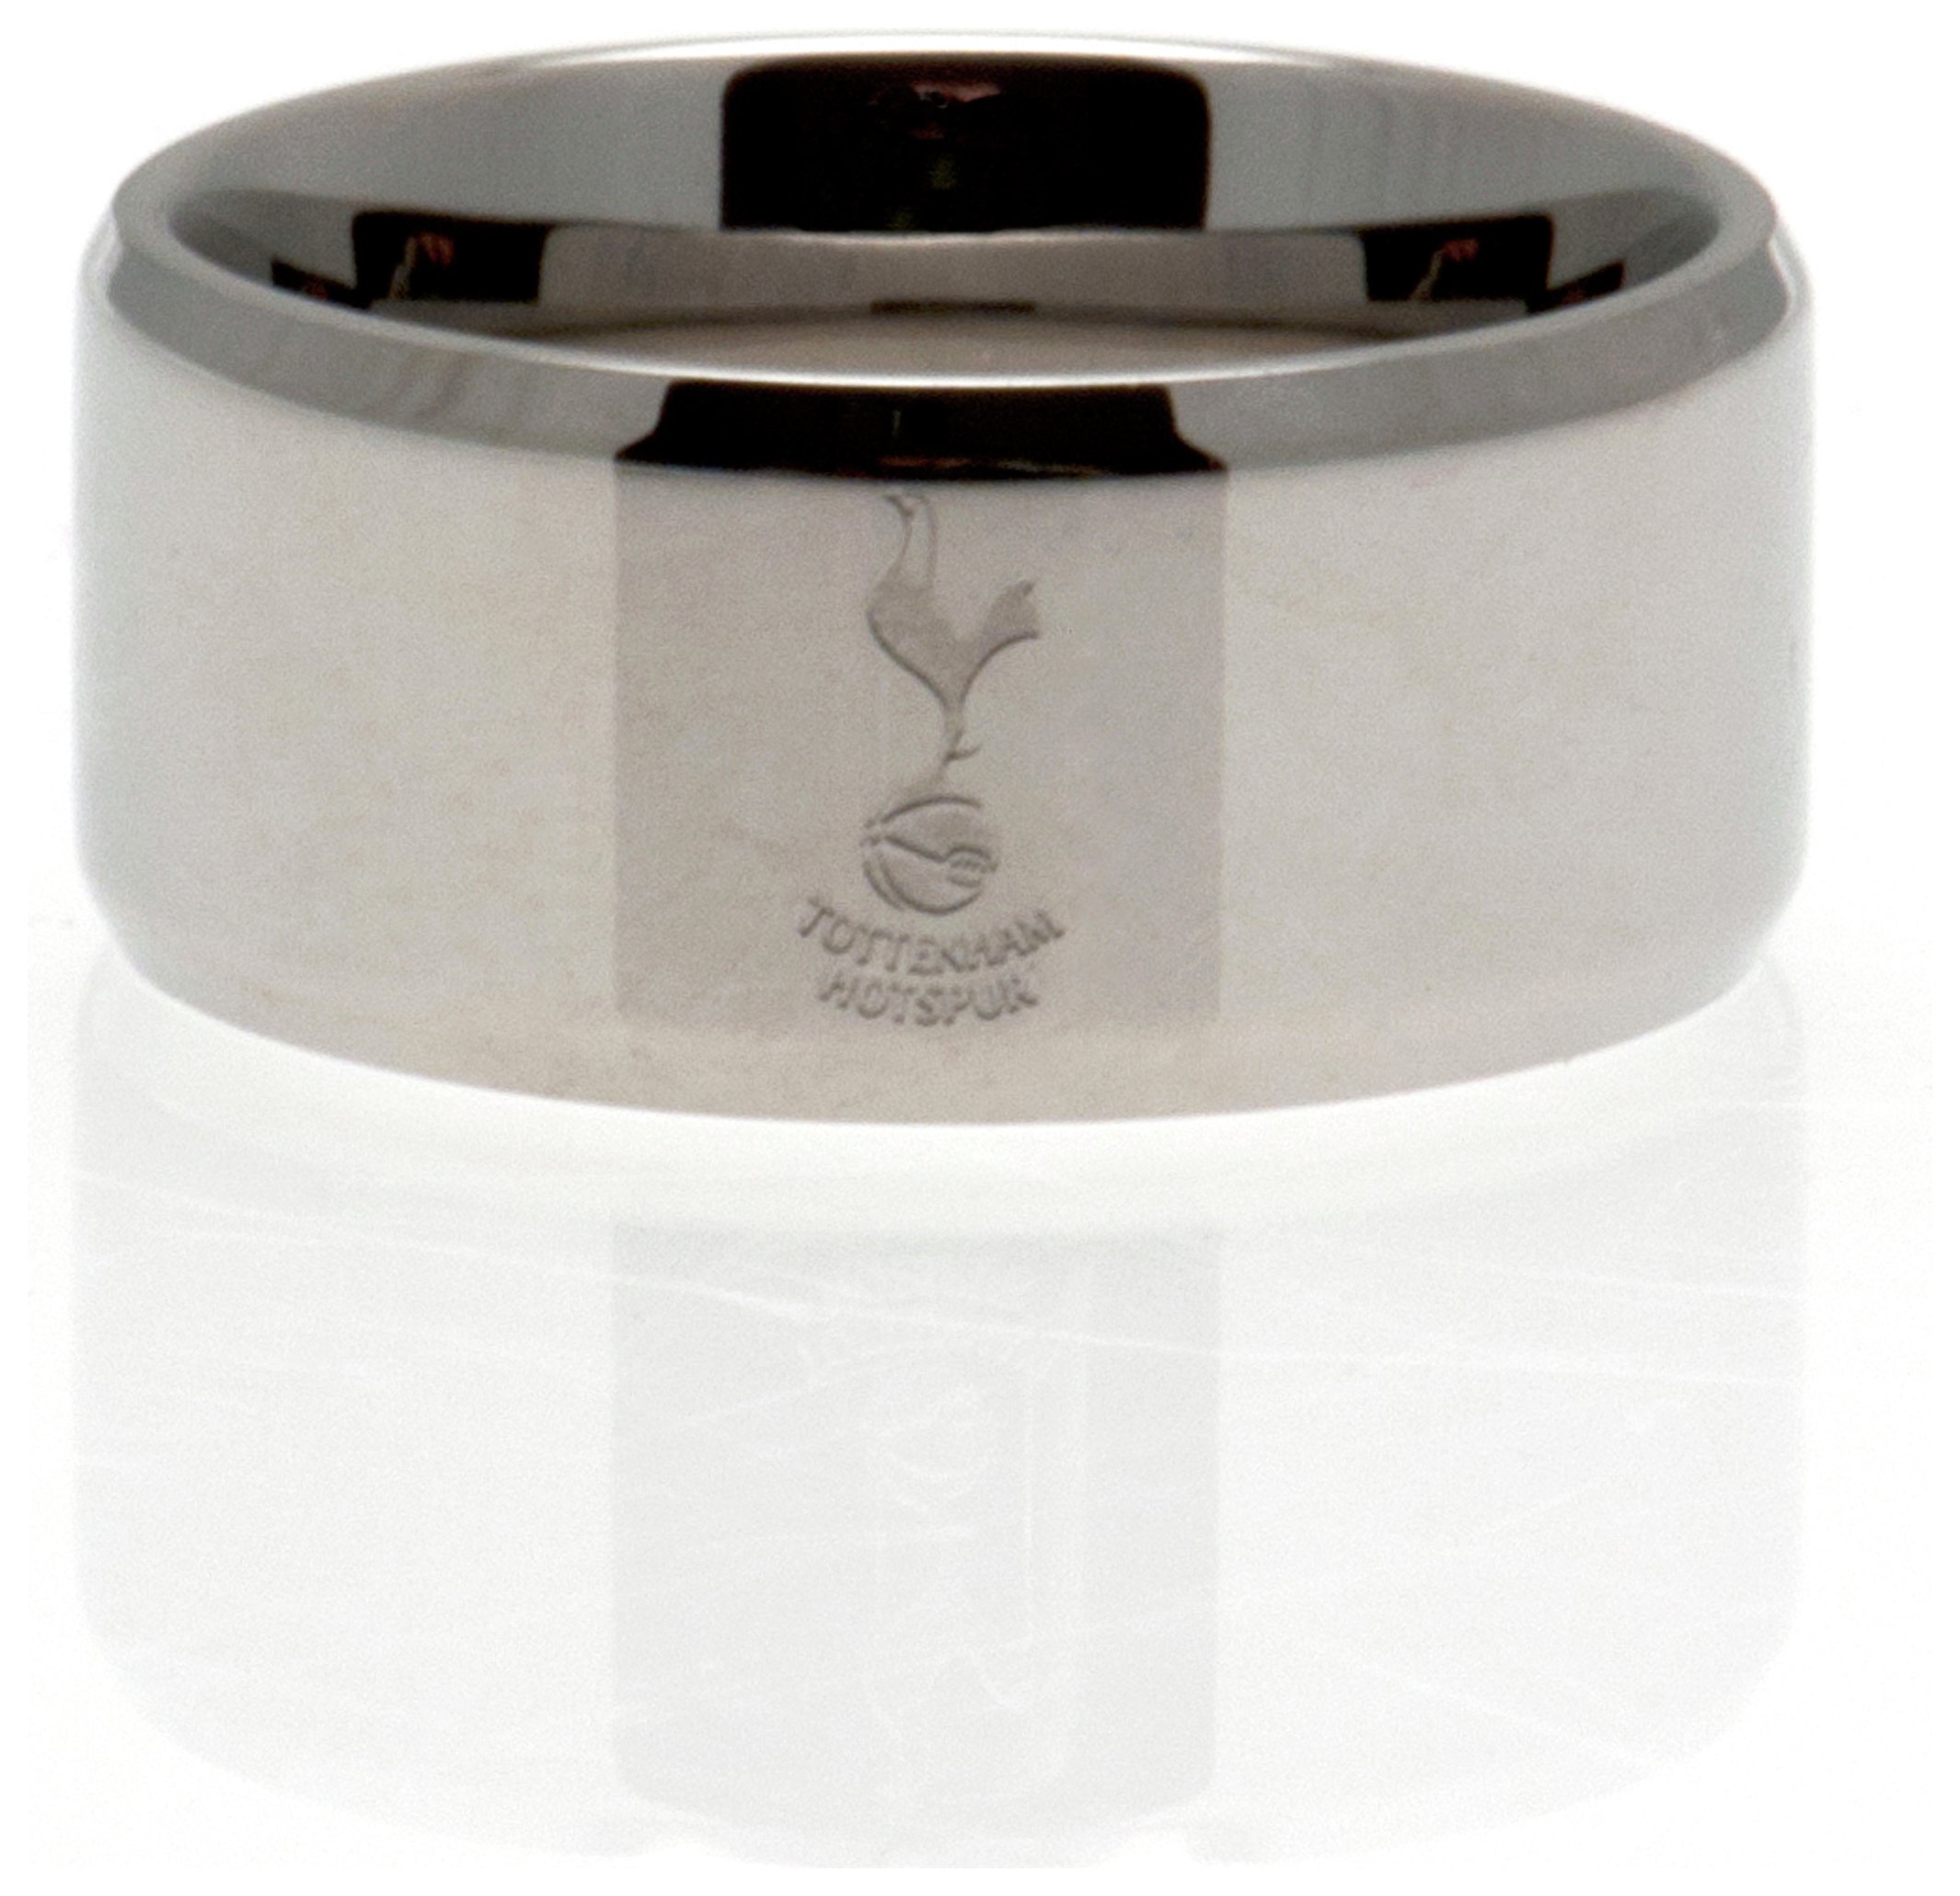 Stainless Steel Tottenham Hotspur Ring - Size X